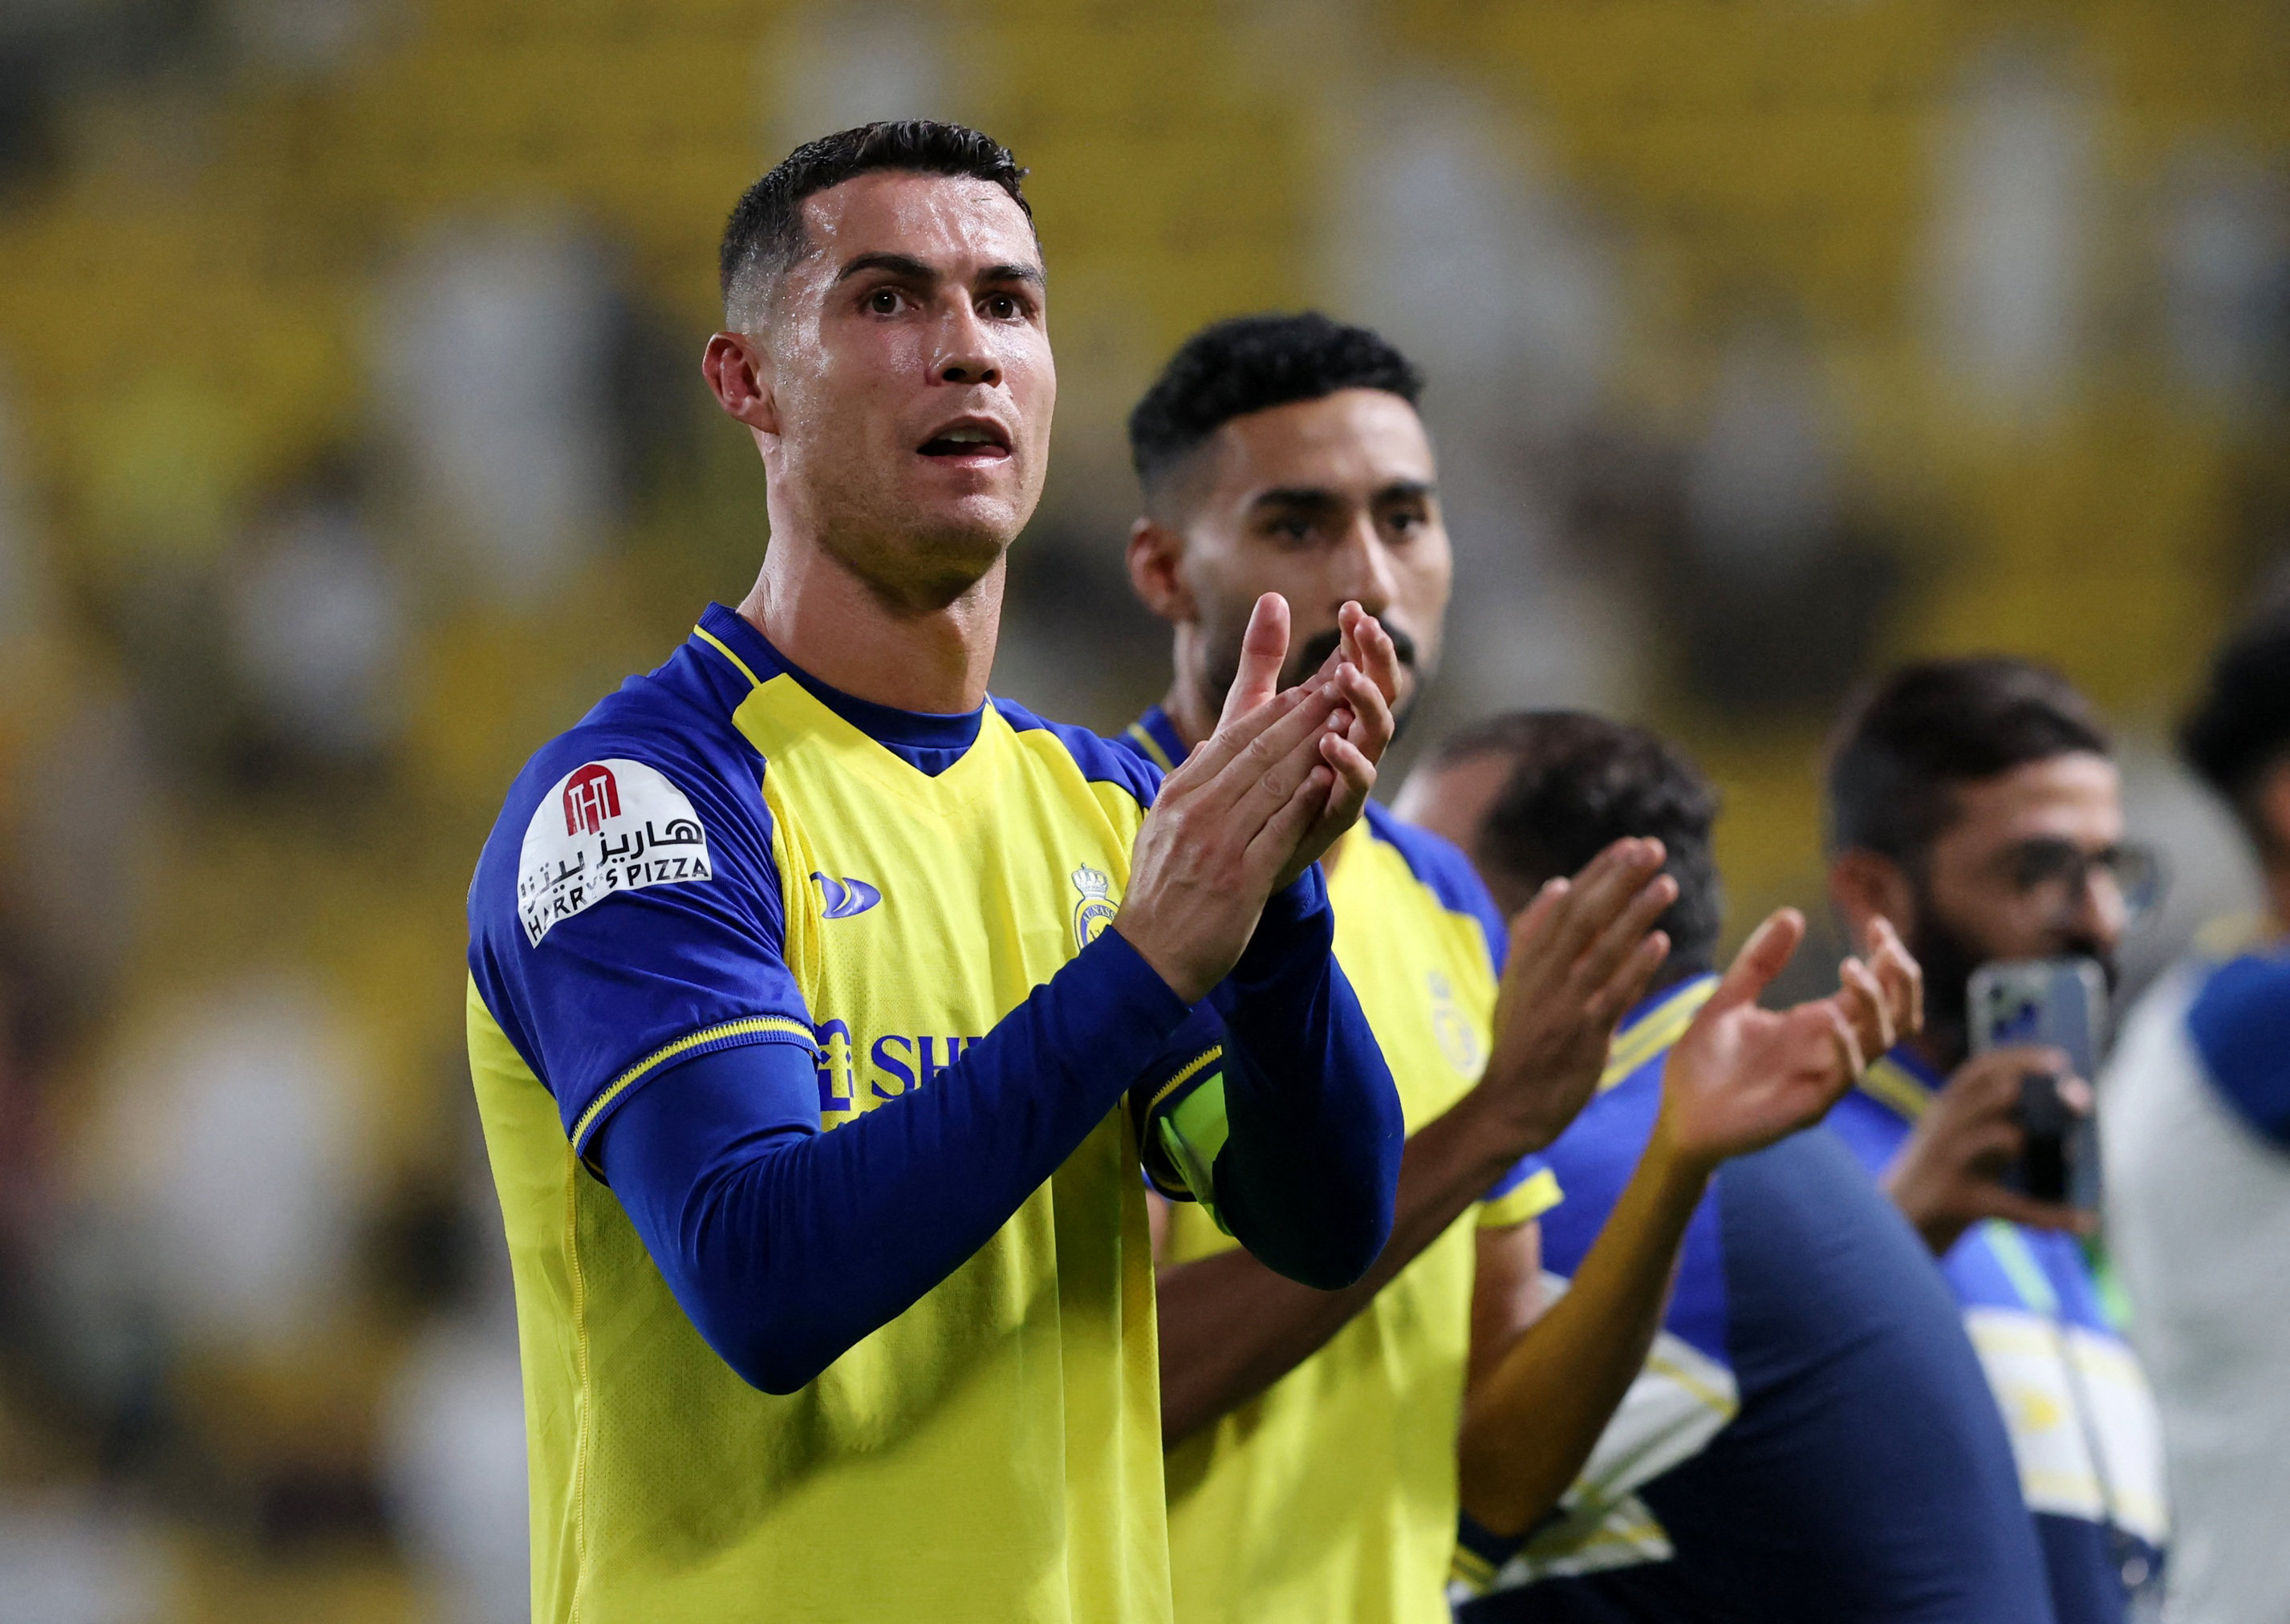 Al Nassr’s Cristiano Ronaldo said the Saudi league could become one of the world’s best. Photo: Reuters